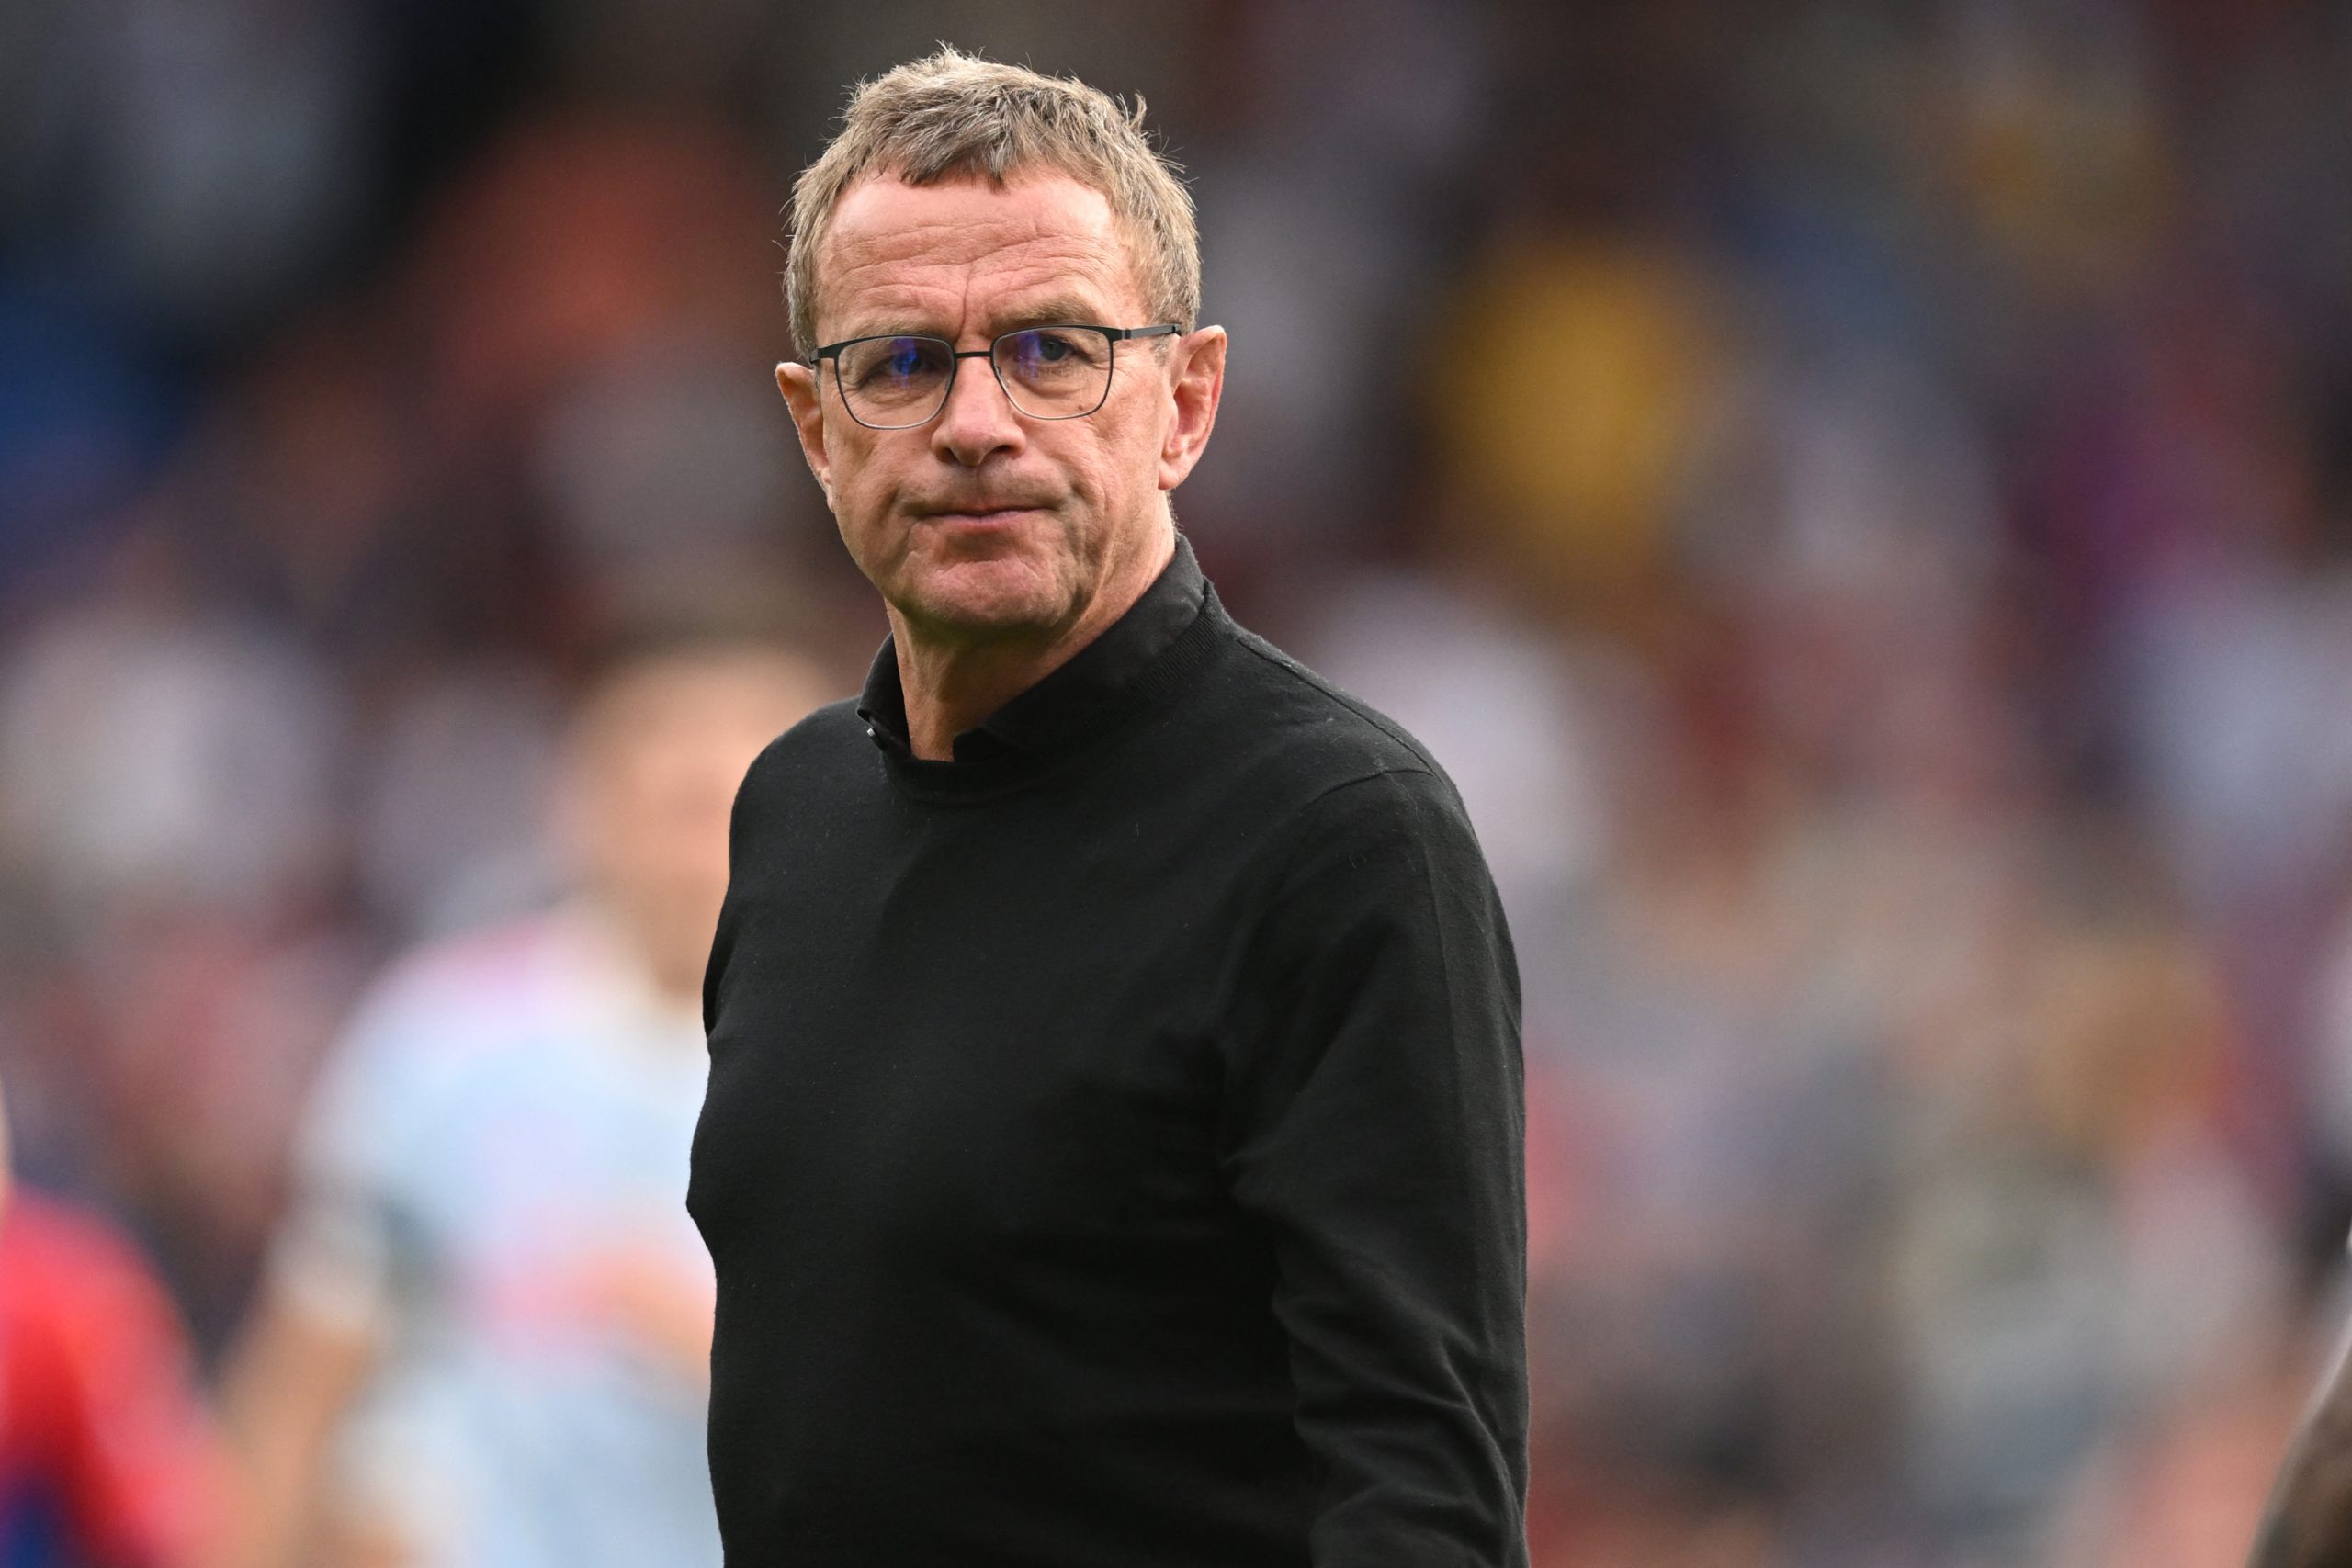 Manchester United Manager: Rangnick confirms he will leave Man United  